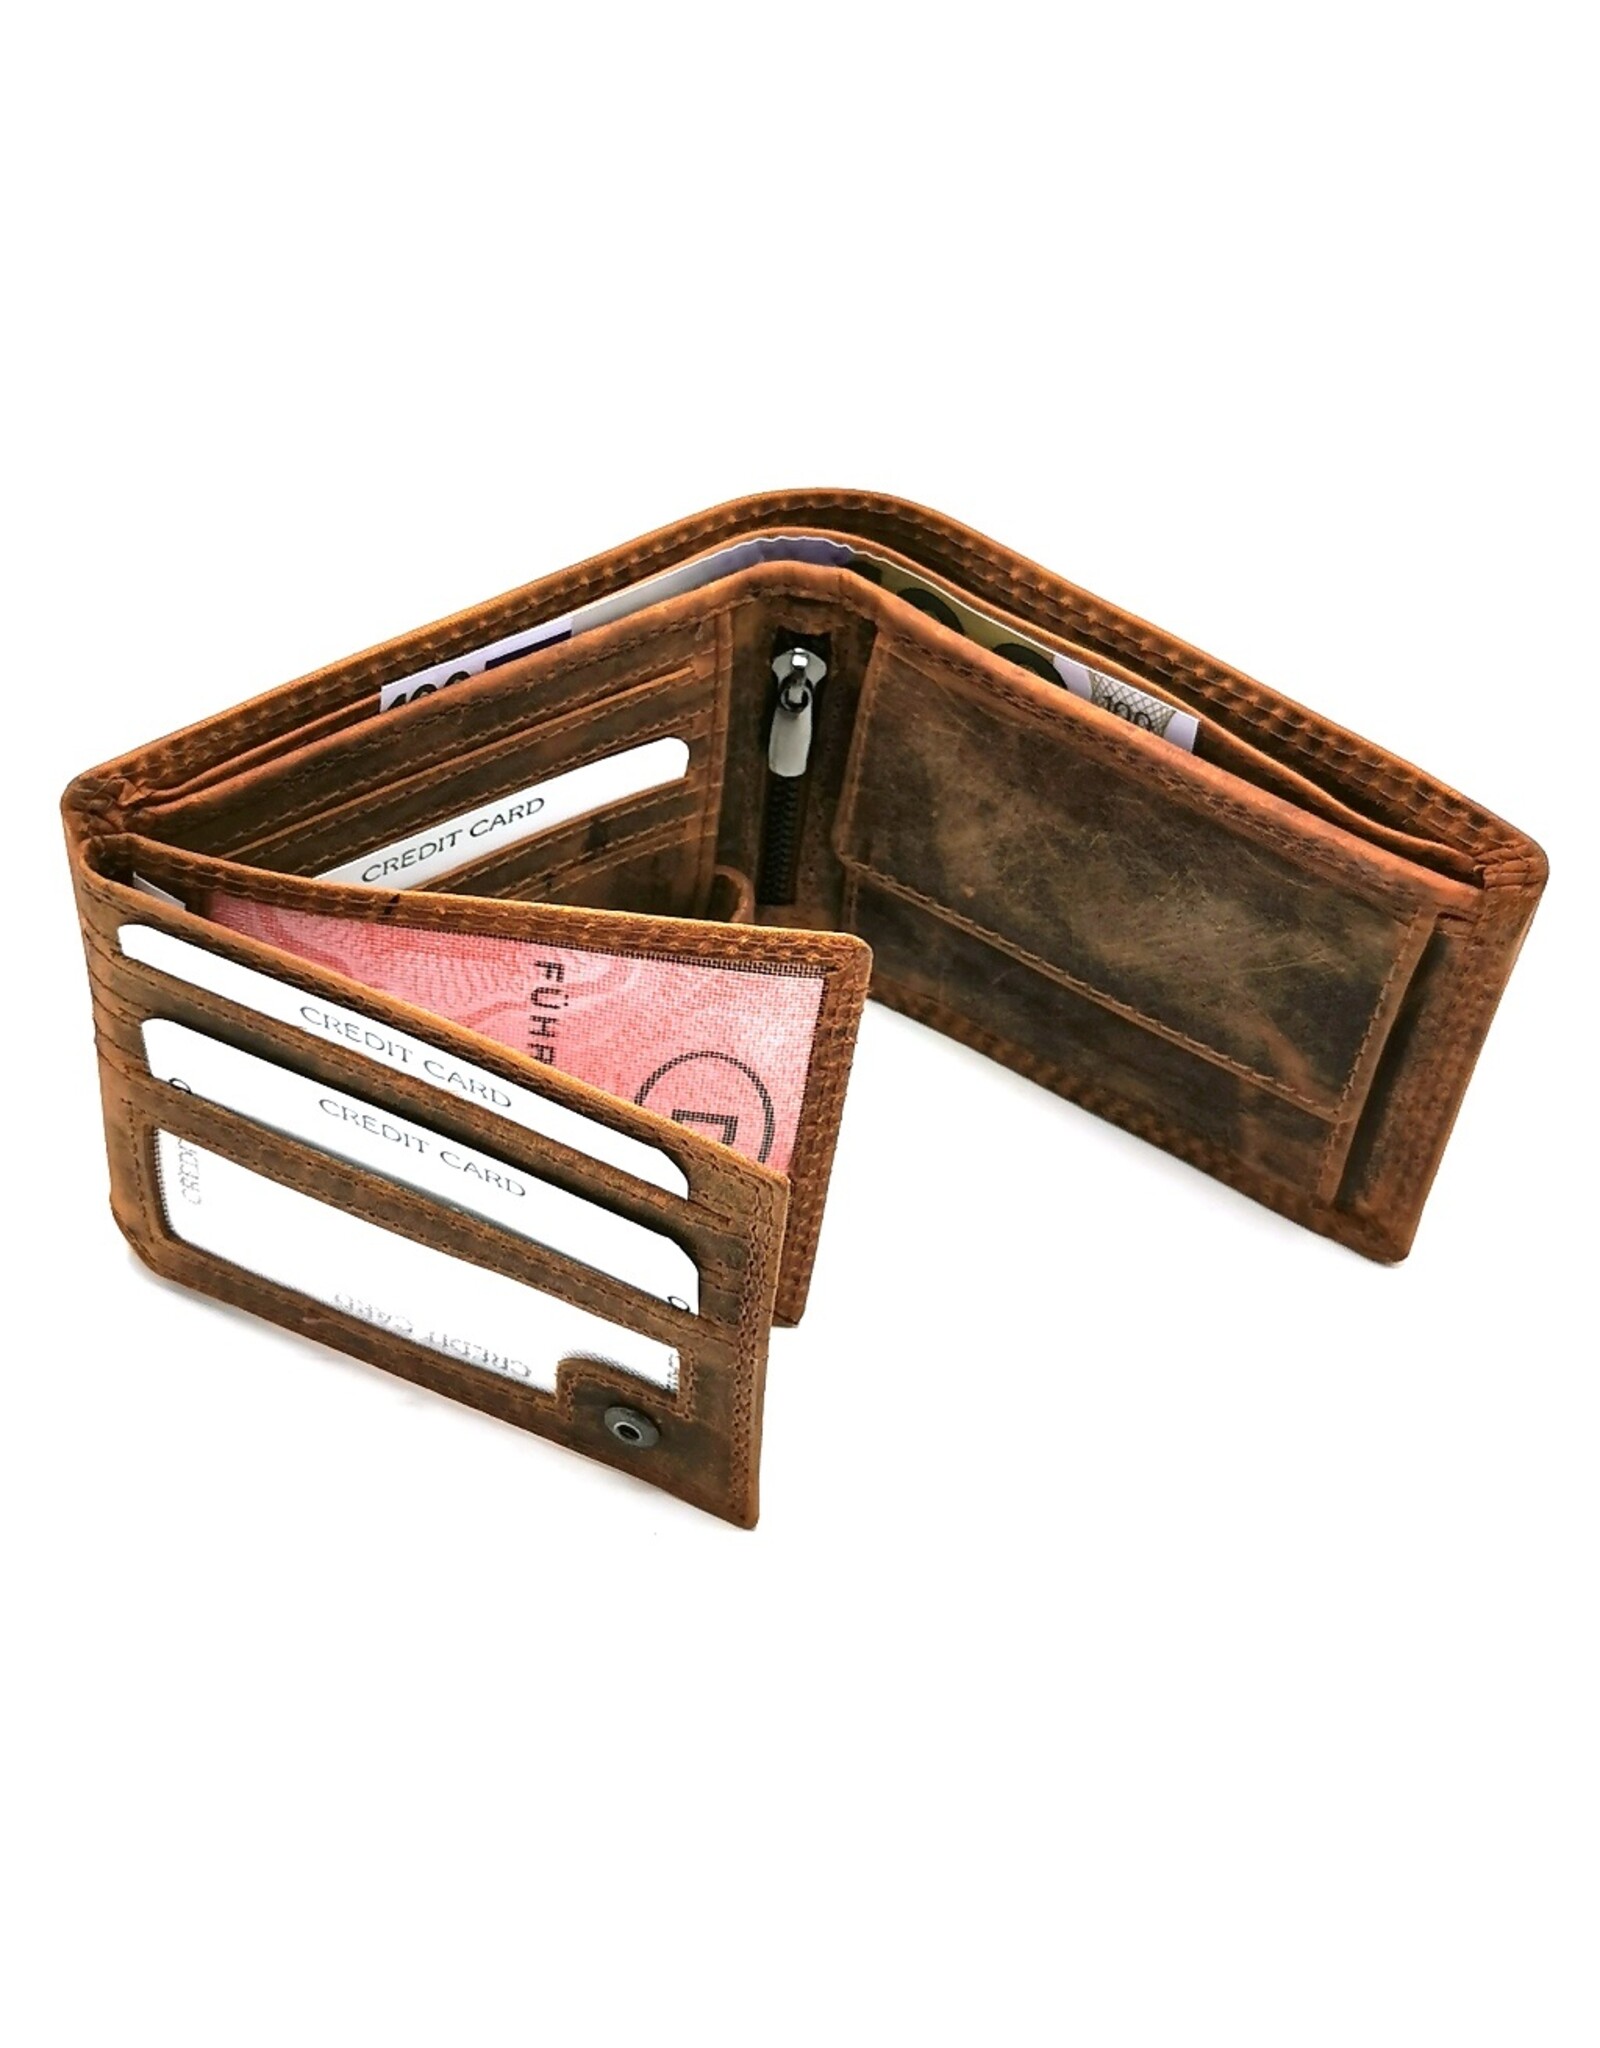 Leather Fox Leather Wallets - Leather Wallet with embossed Deer